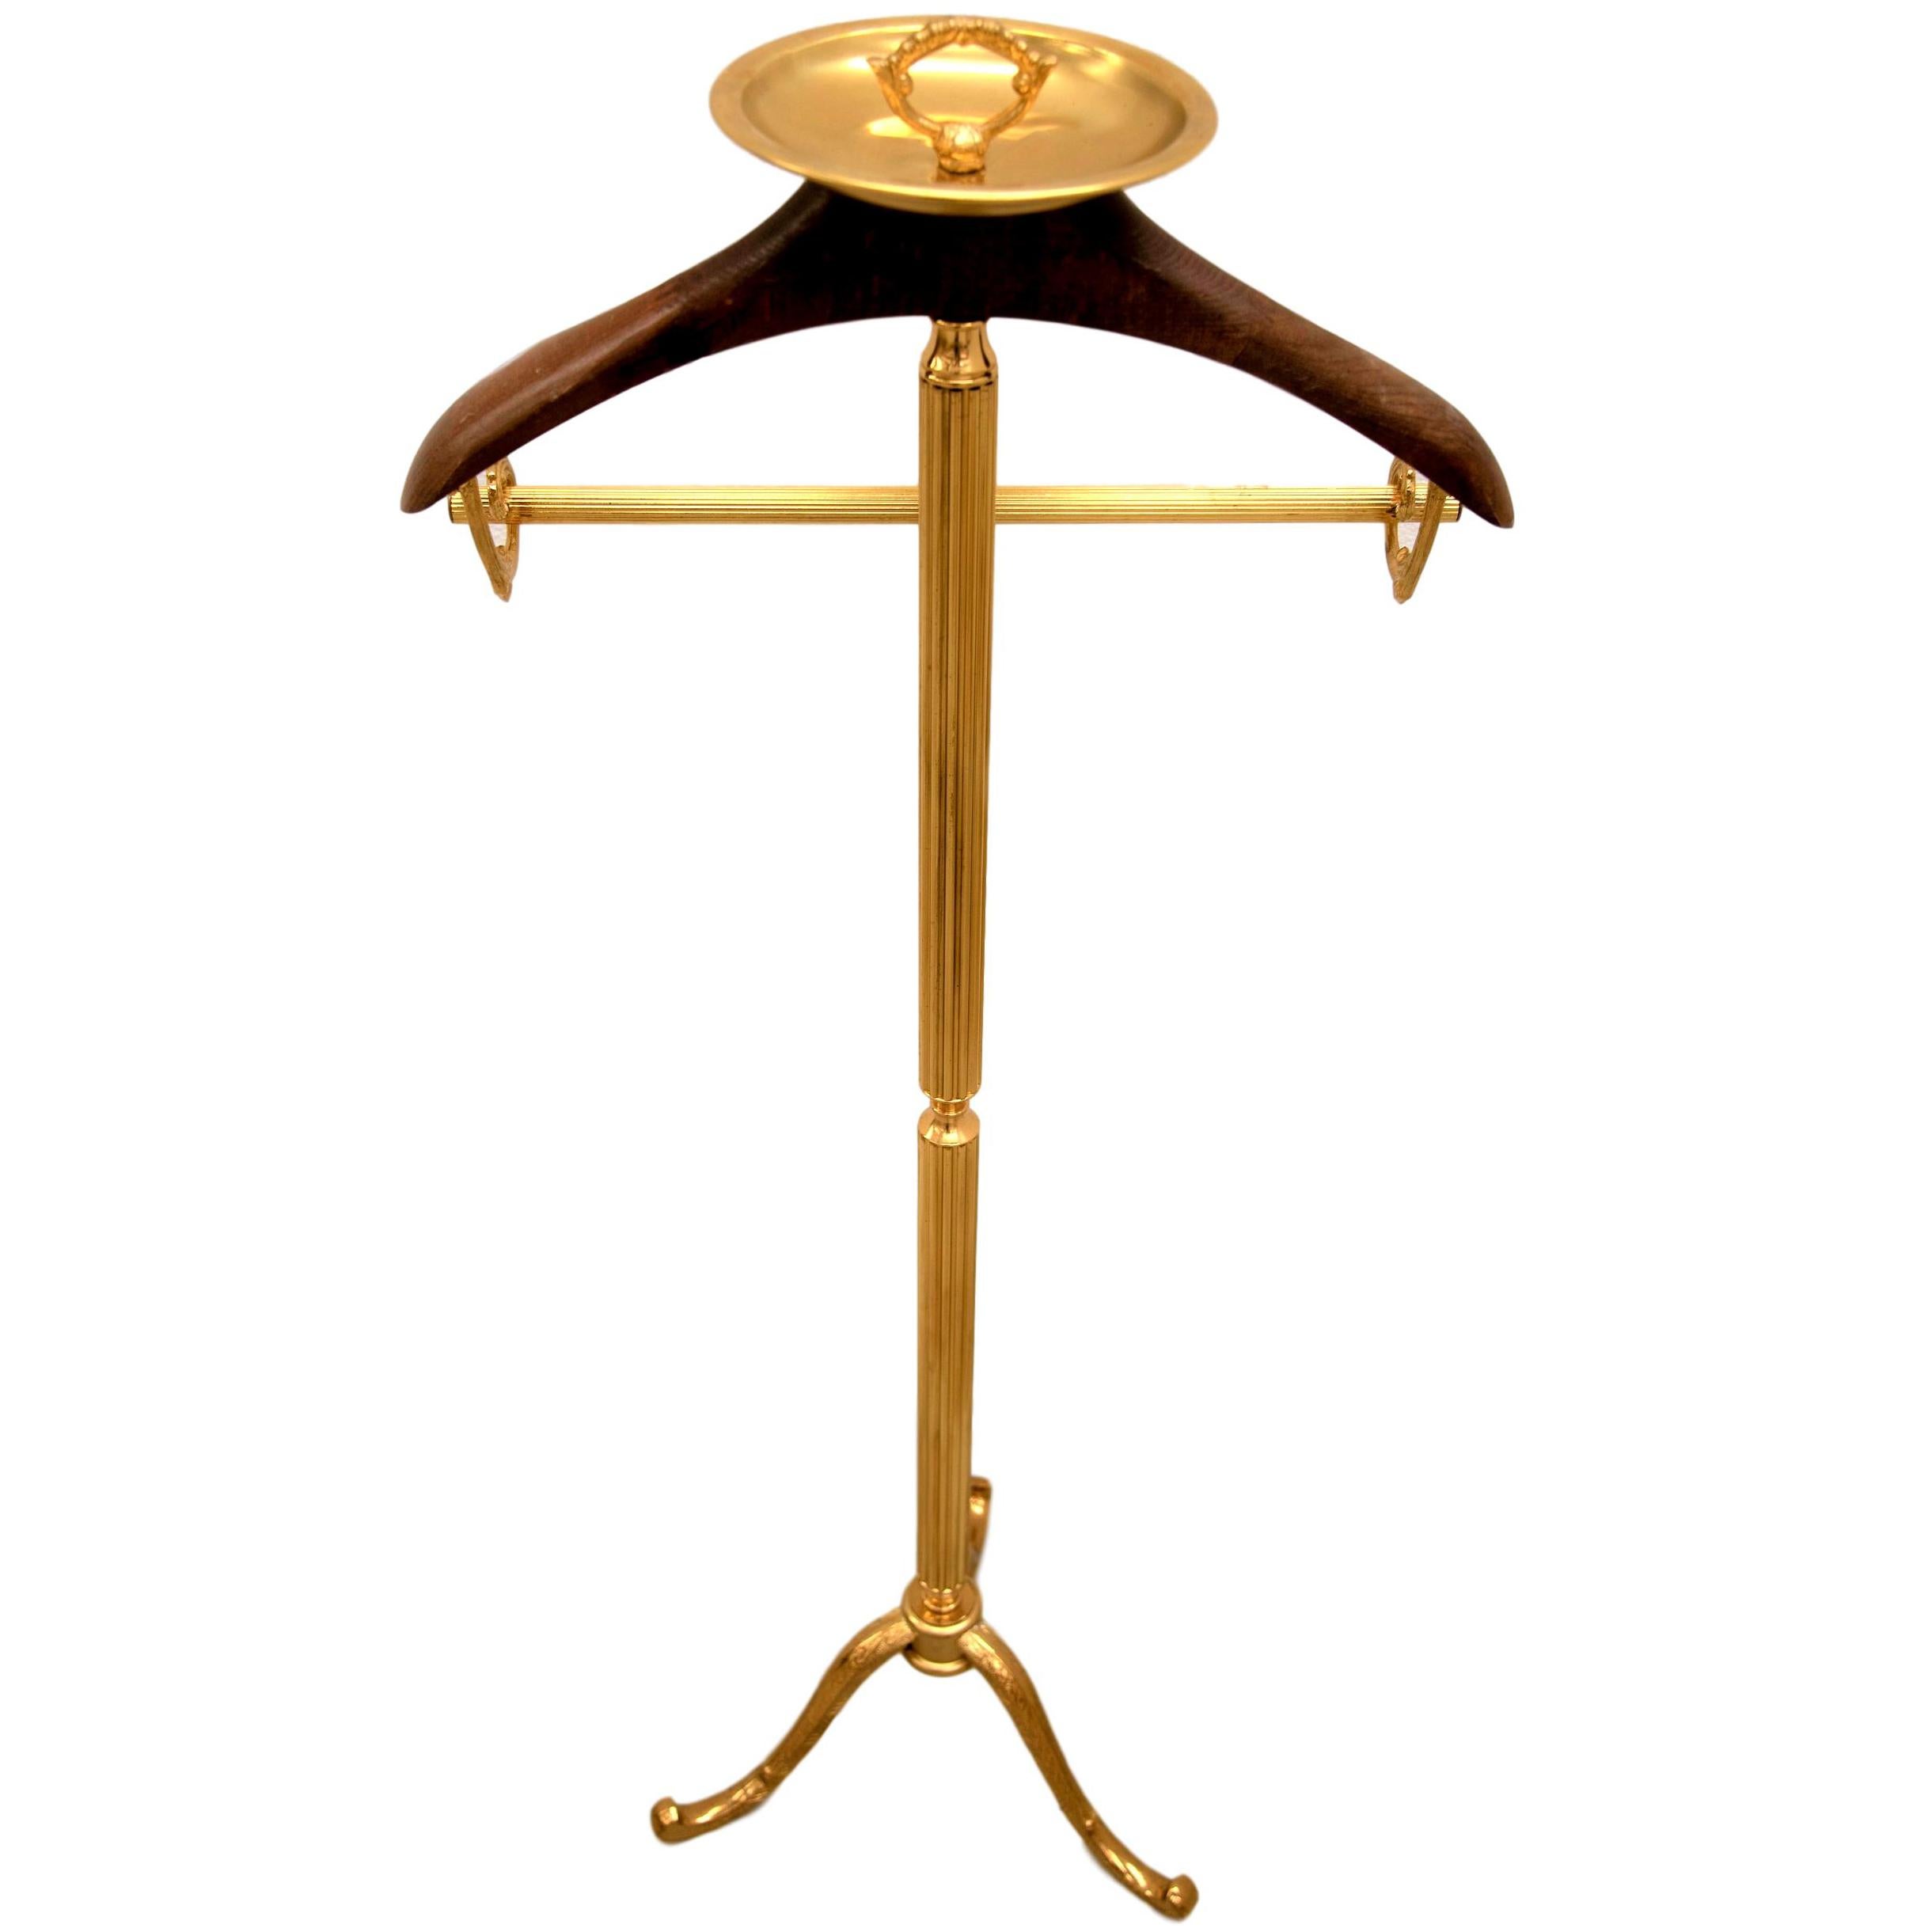 Vintage 1960s Italian brass and wood dressboy valet stand, with Classic carved column and decorated pedestals. This beautiful and elegant brass valet was designed and manufactured in Italy. The valet has a wooden clothes hanger, a reling to hang